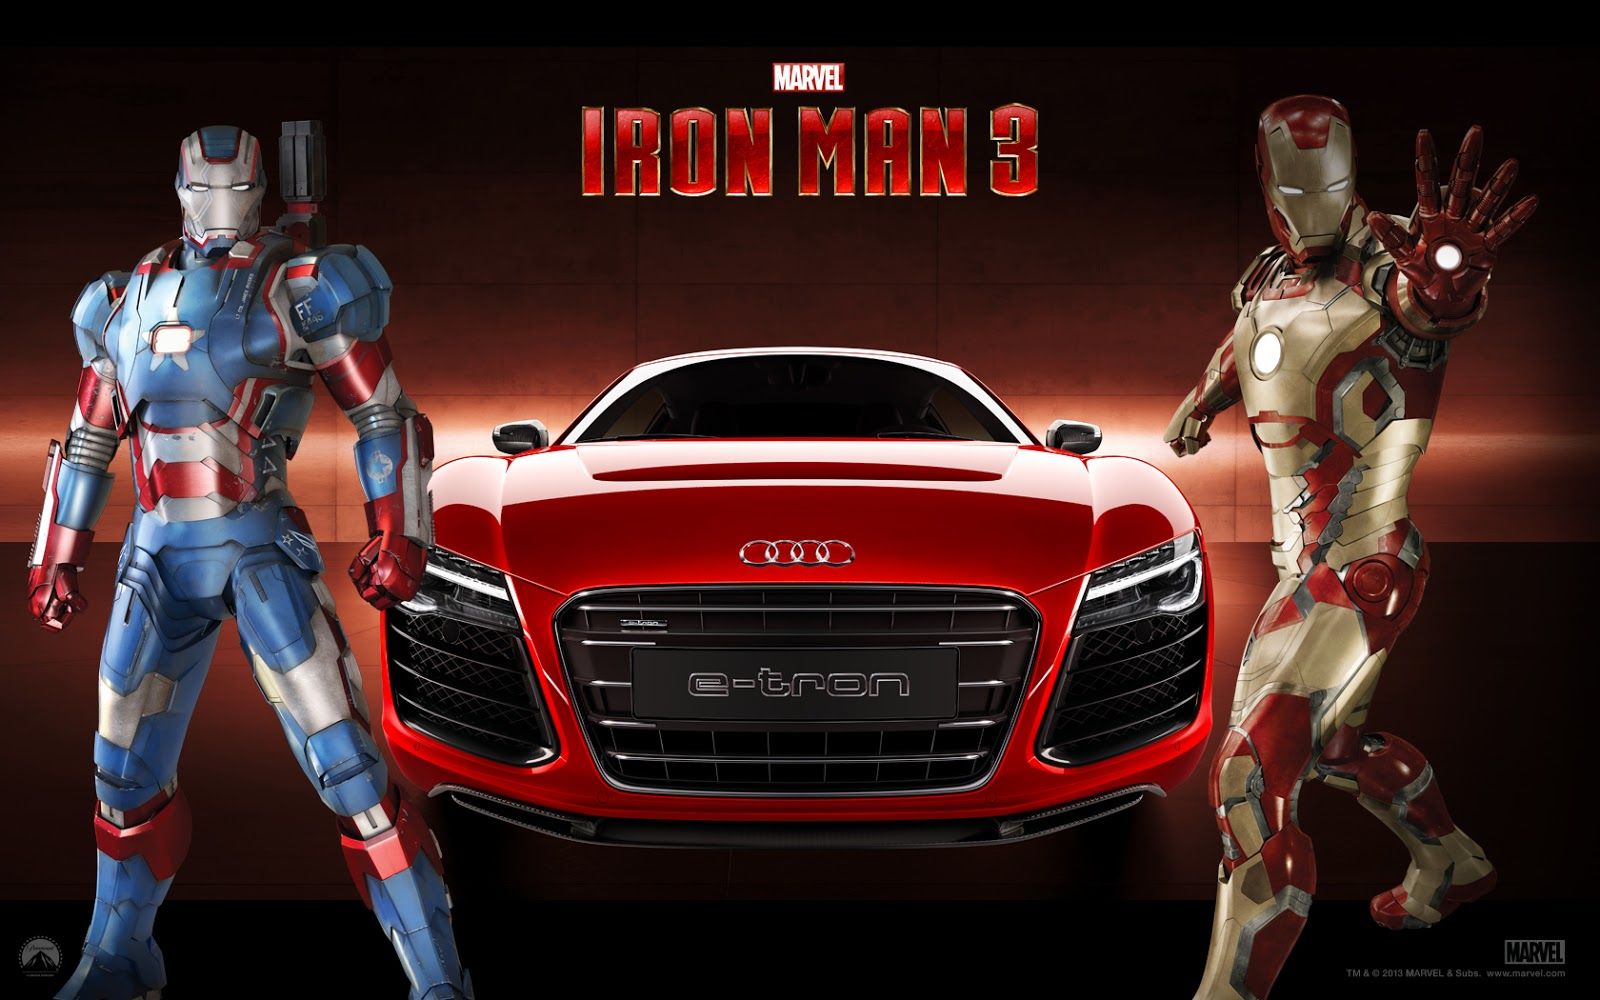 Free Download Iron Man 3 Wallpapers Group 96 1600x1000 For Your Desktop Mobile Tablet Explore 61 Audi R8 E Tron Wallpapers Audi R8 E Tron Wallpapers Audi E Tron Wallpapers Audi R8 Wallpaper